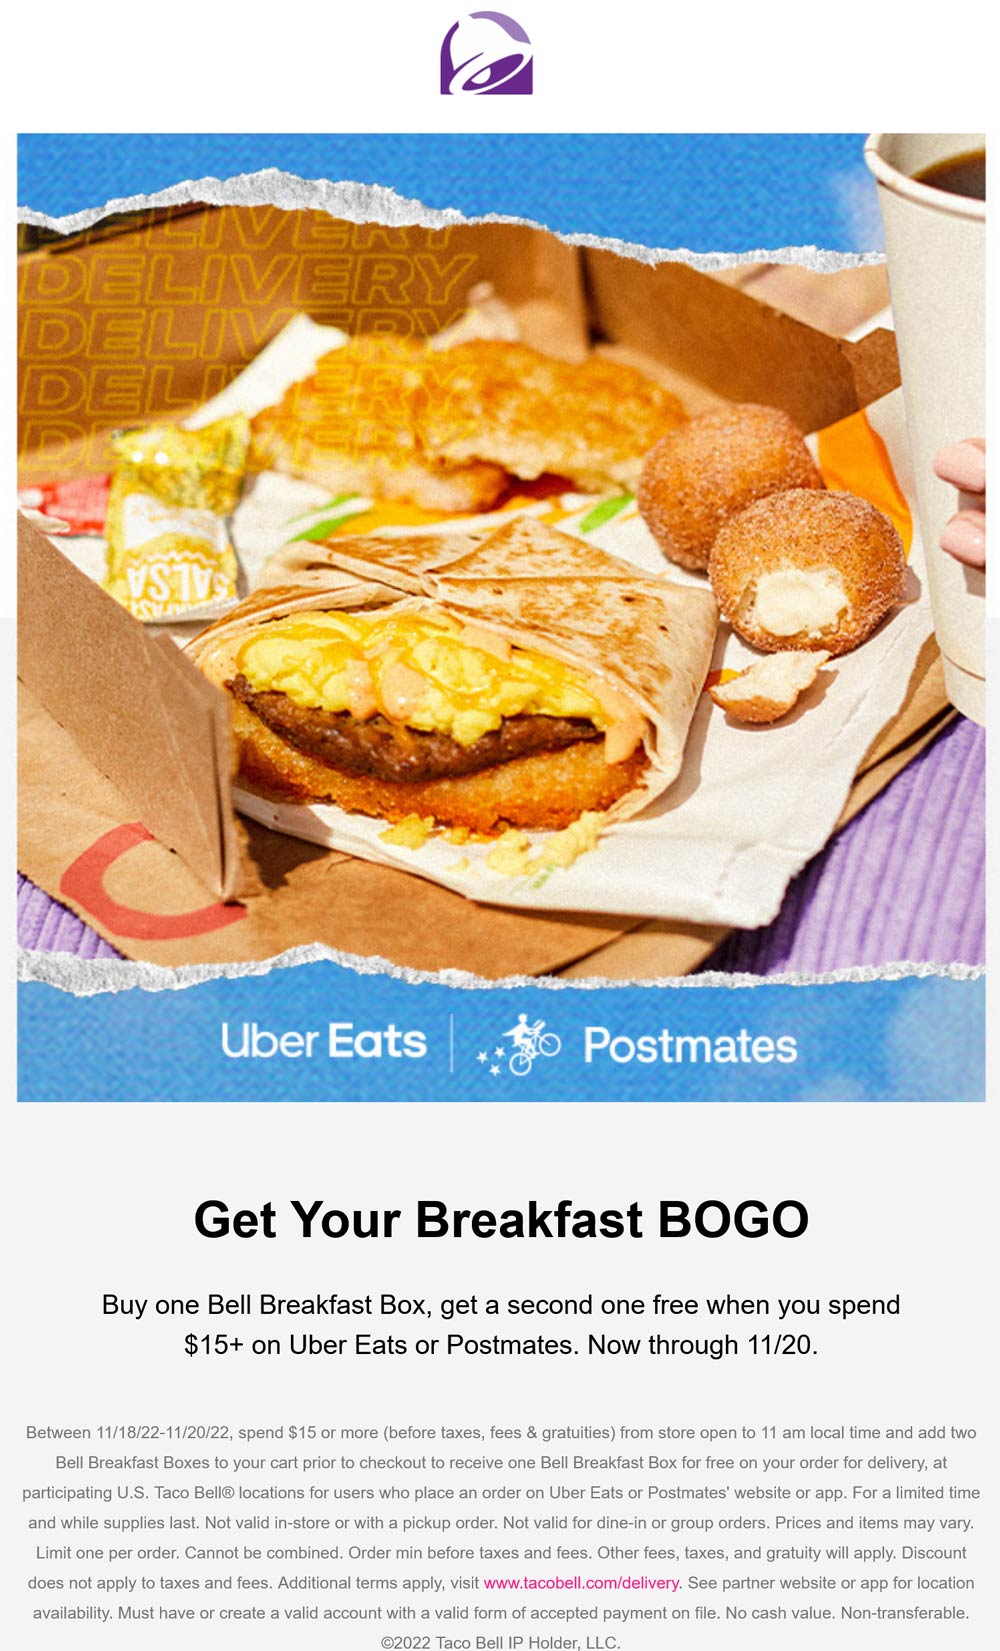 Taco Bell restaurants Coupon  Second breakfast box free on $15 via delivery at Taco Bell #tacobell 